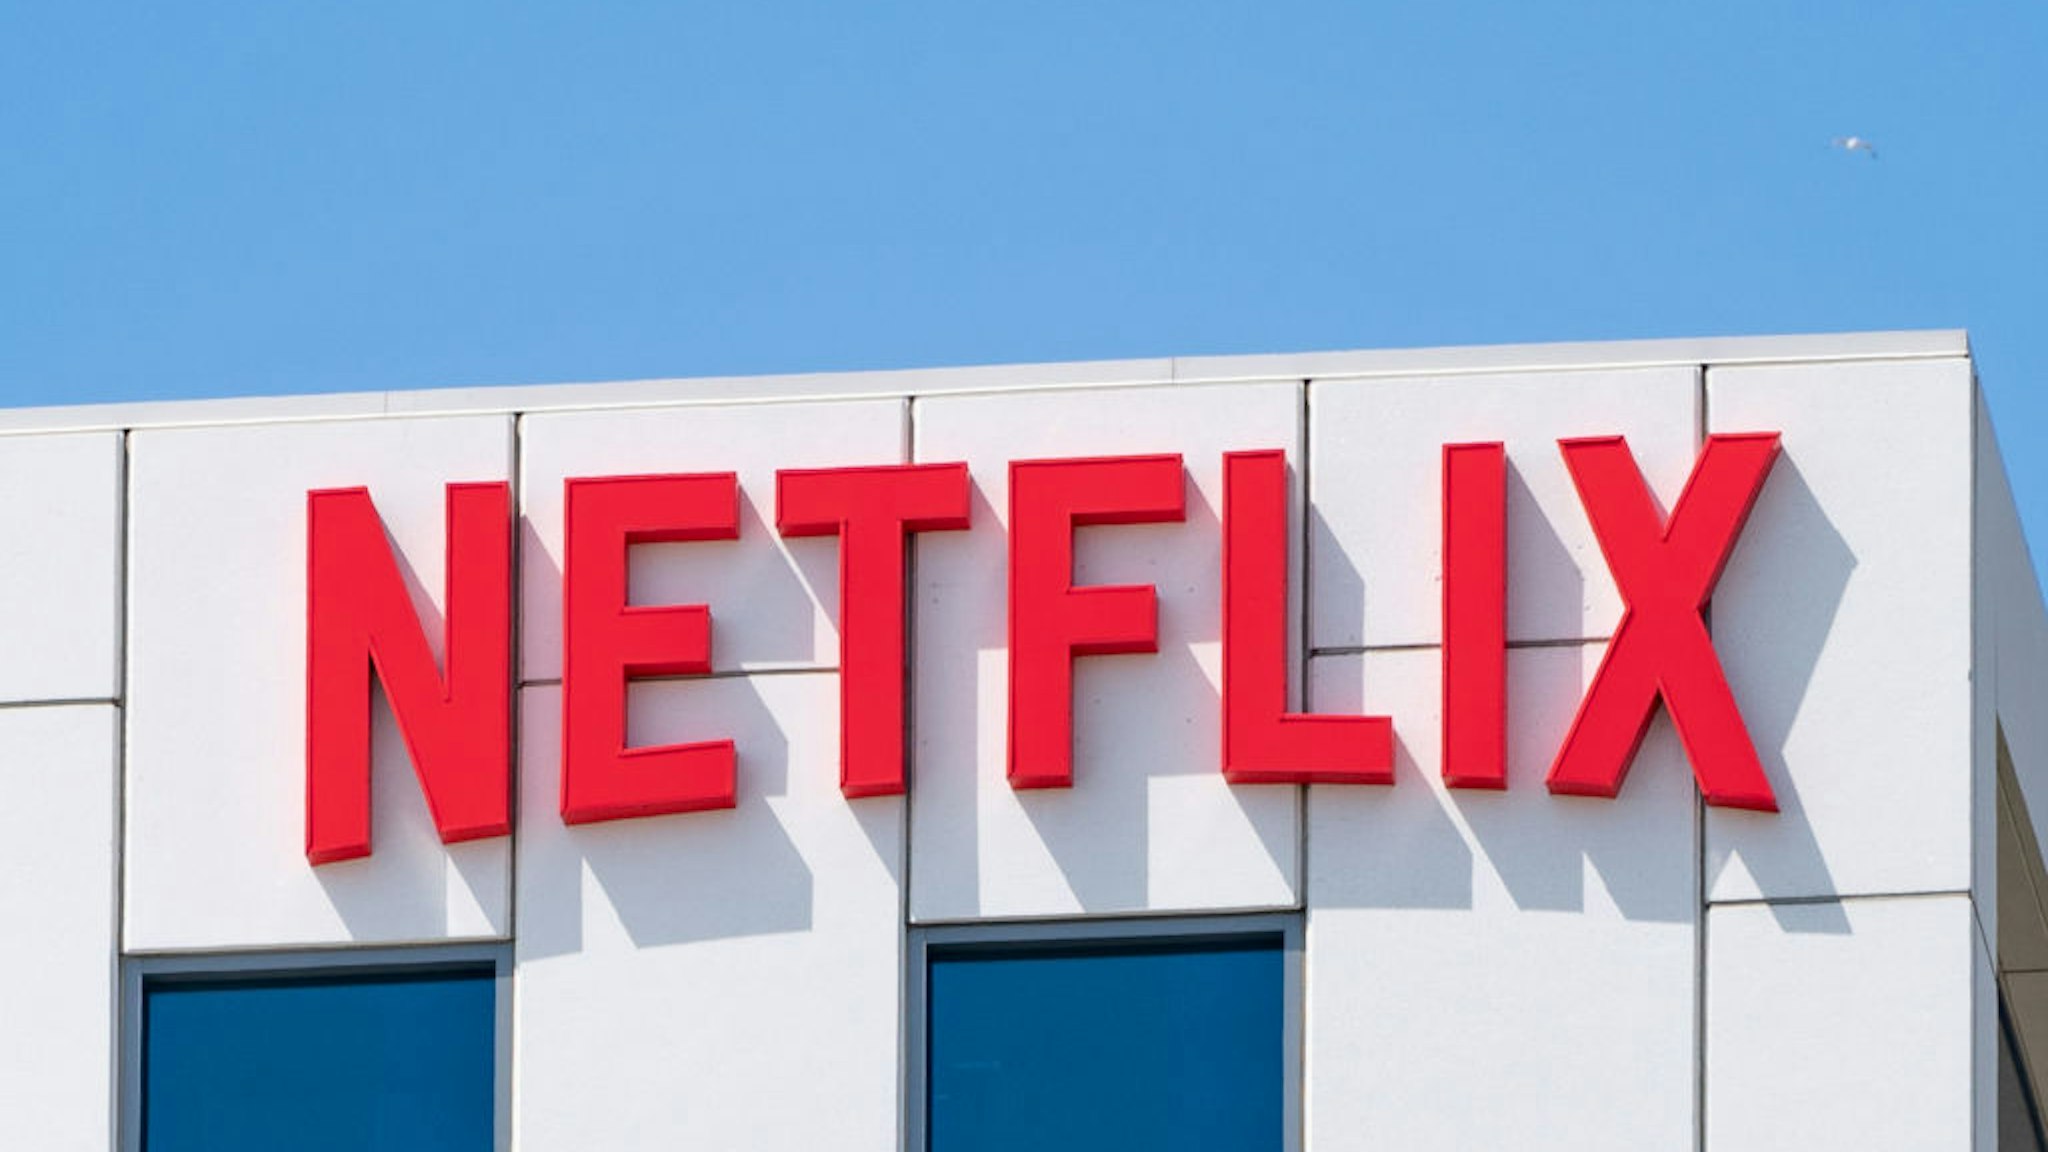 General views of the Netflix corporate office buildings on Sunset Blvd on May 06, 2021 in Hollywood, California.